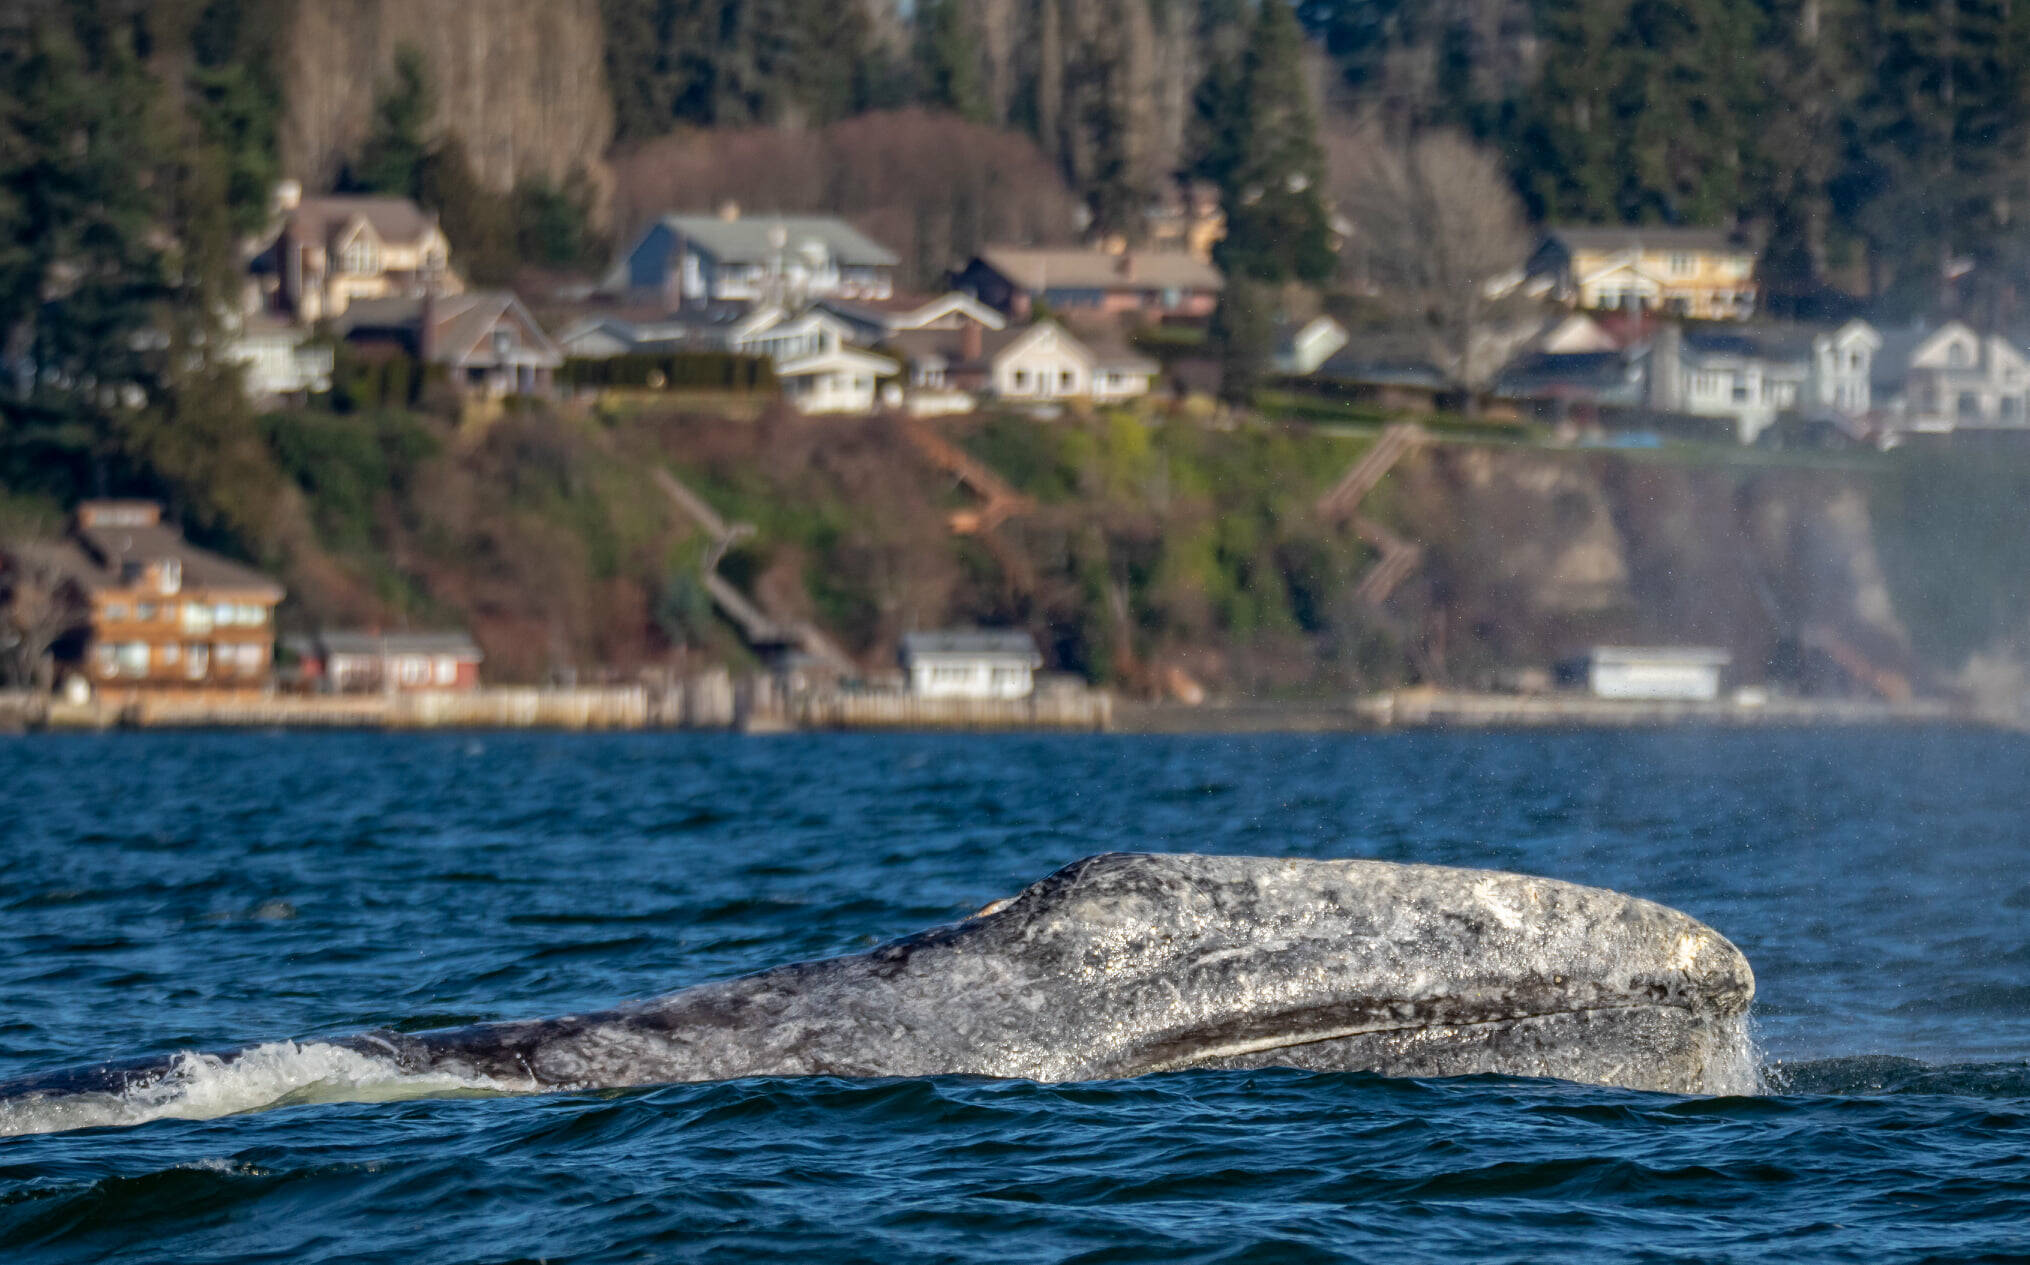 Photographer Janine Harles, a whale sighting network volunteer, spotted CRC-22, also known as Earhart, in Possession Sound in early and mid-February. Whale experts can identify individual grays by their underside flukes and dorsal ridge areas. The whales have unique markings from barnacles, sea lice and predator attacks.